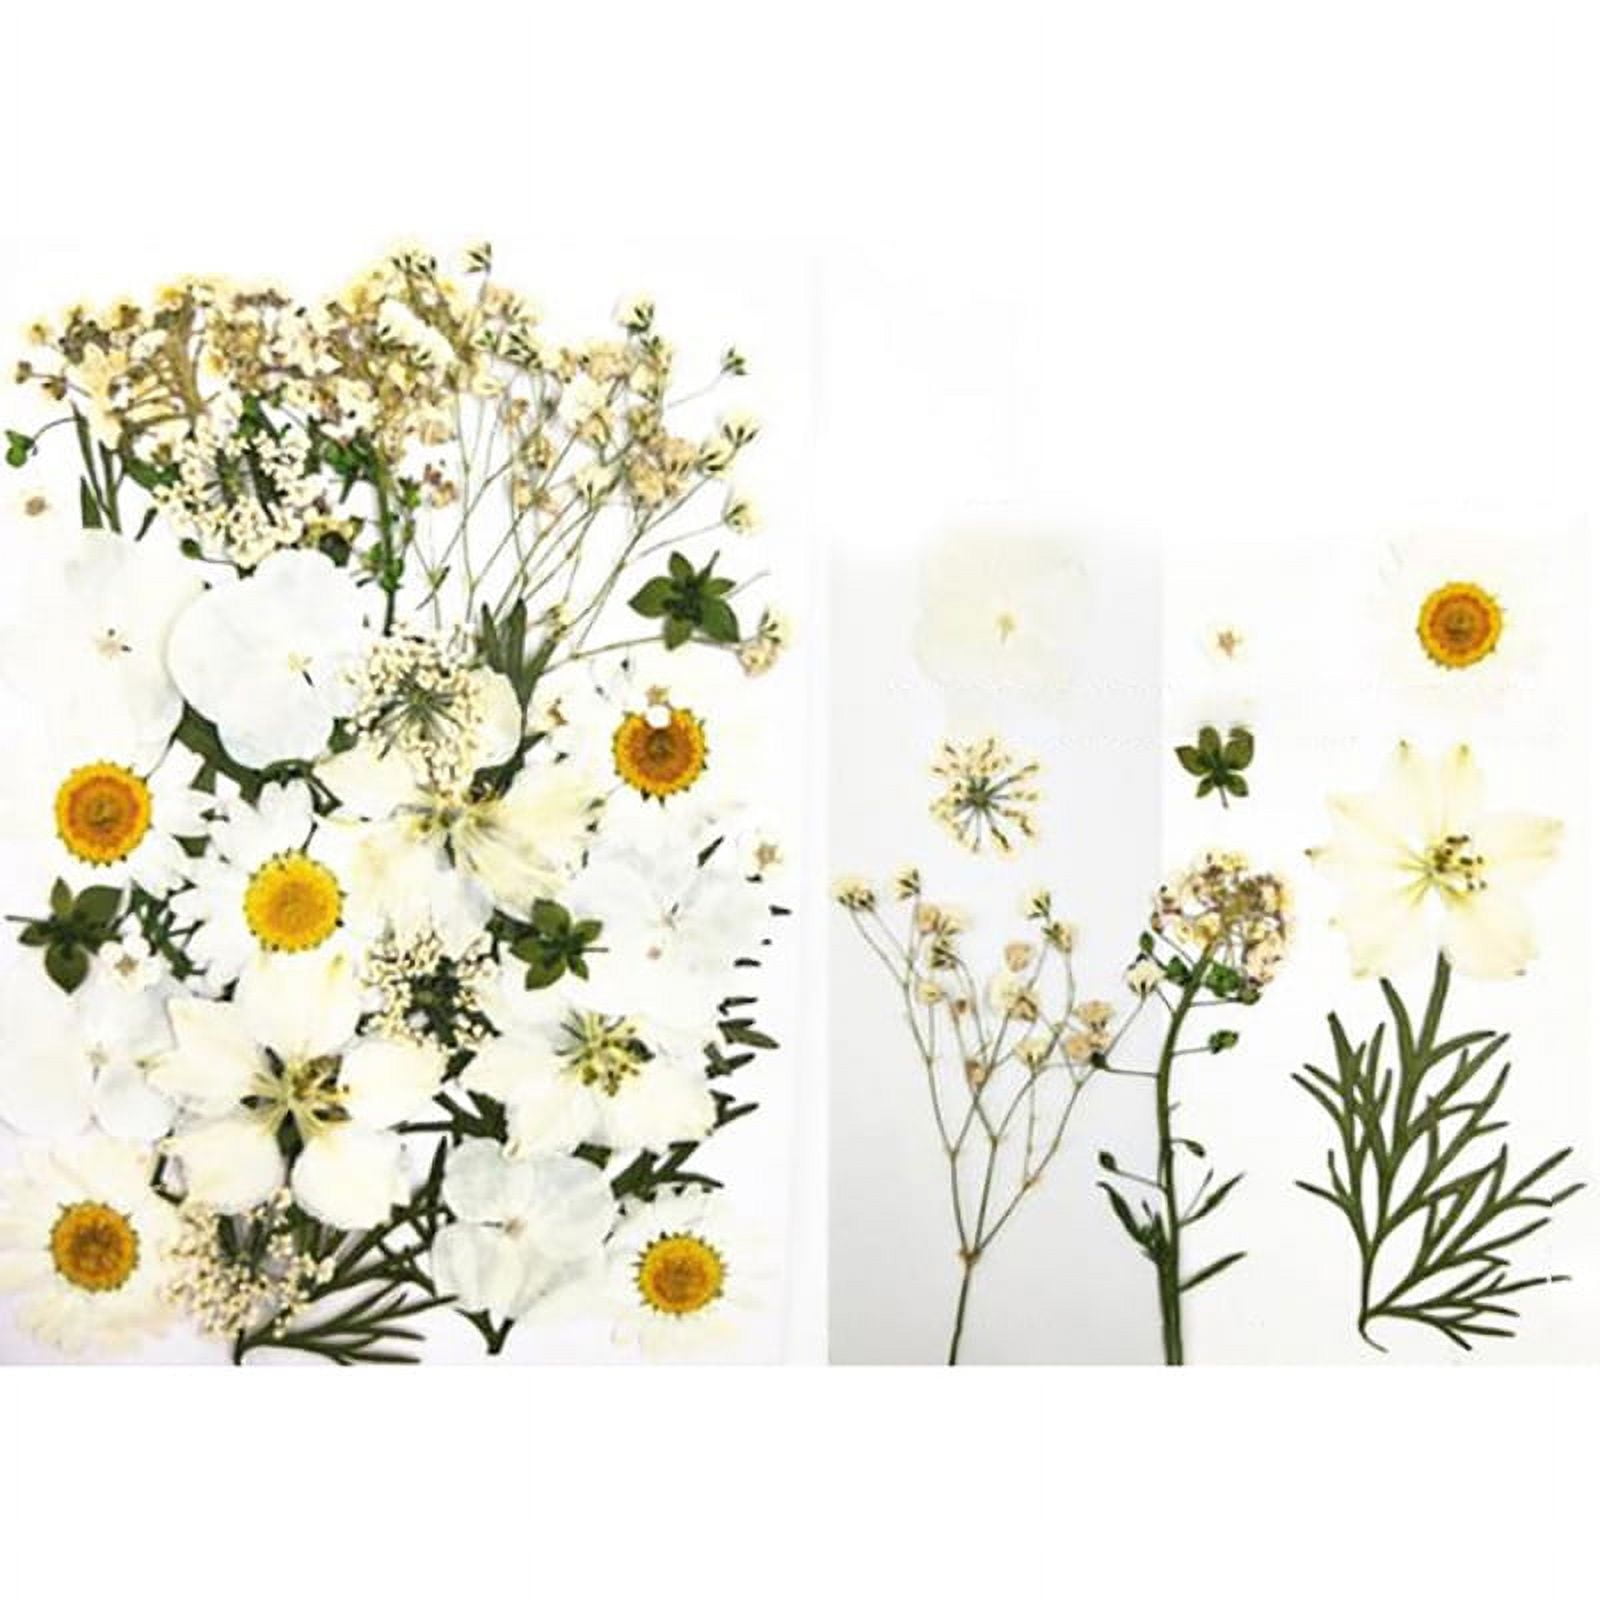 20 PCS / Pack Mix Color Daisy Pressed Daisies Dried Daisy Flower Real  Natural Dry Daisy Preserved Wild Flowers Flat Dry Petals Floral 